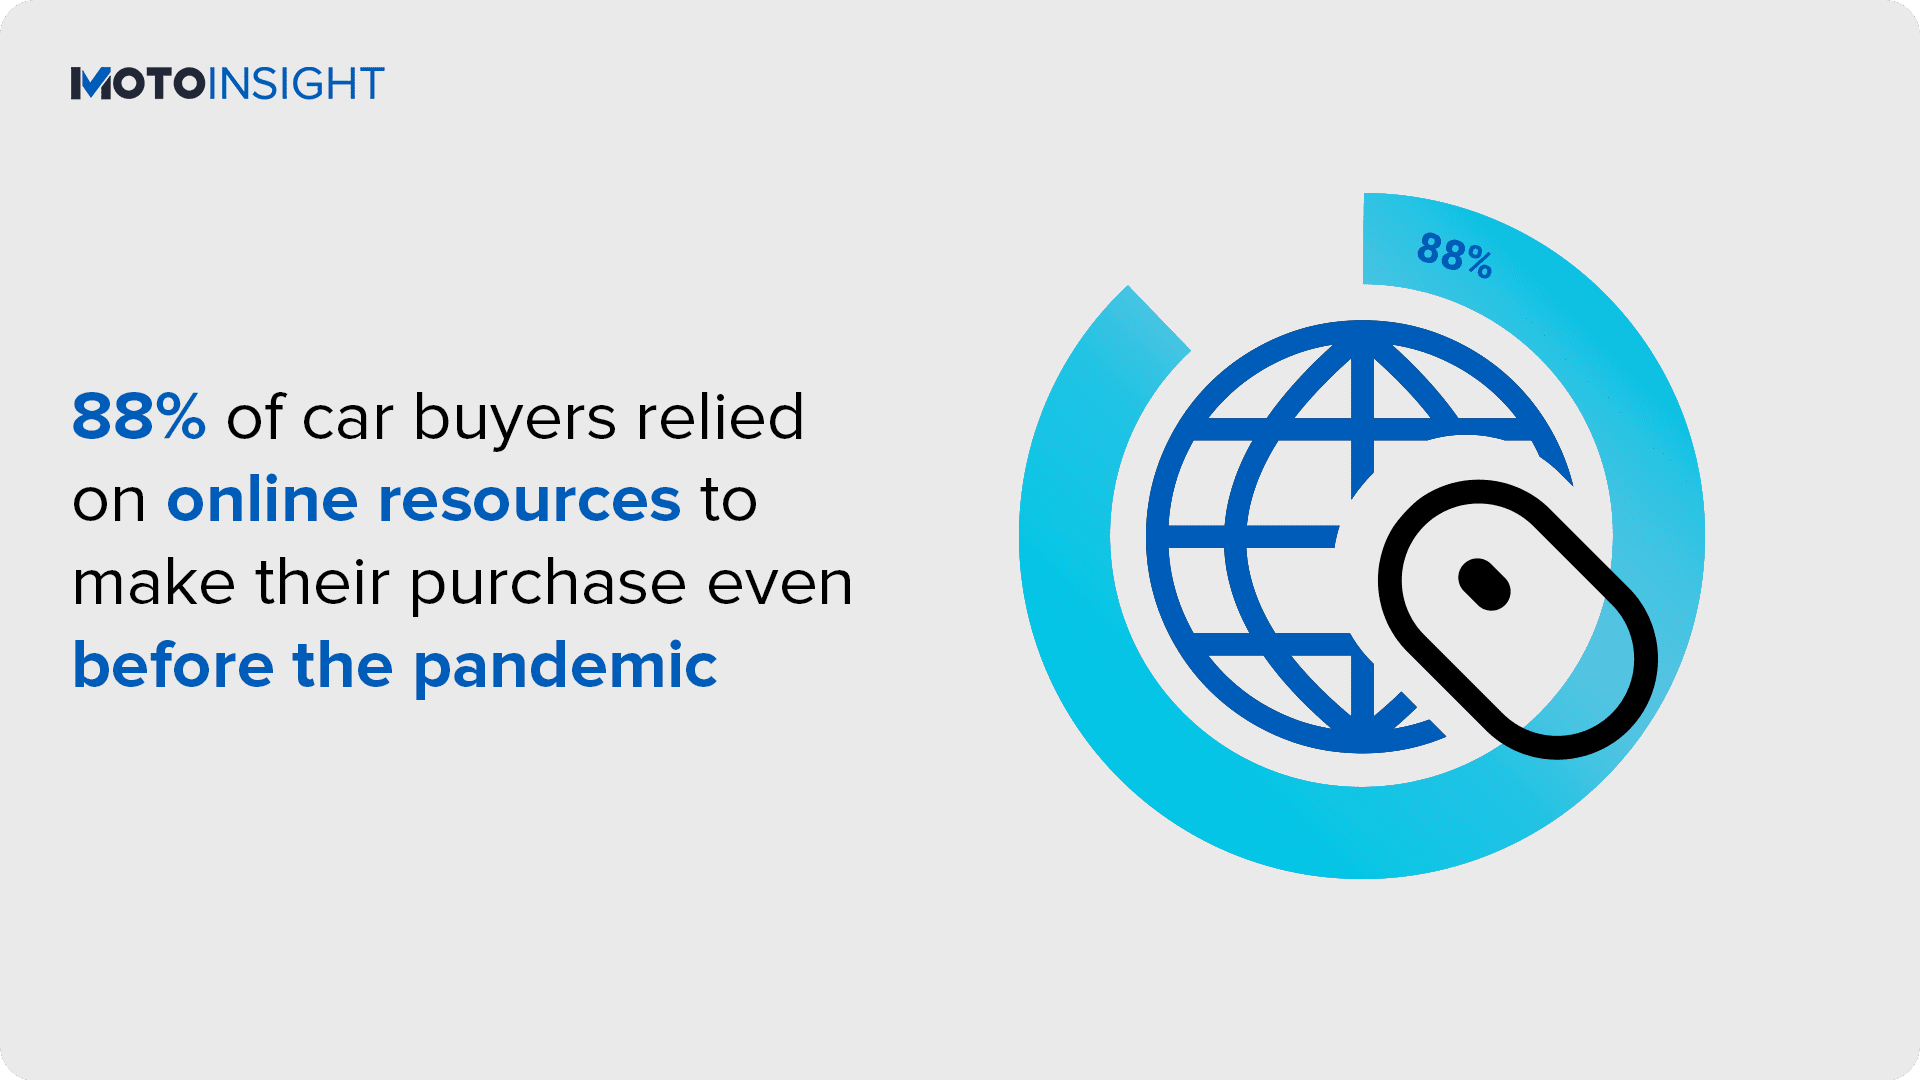 88% of car buyers relied on online resources to make their purchase even before the pandemic